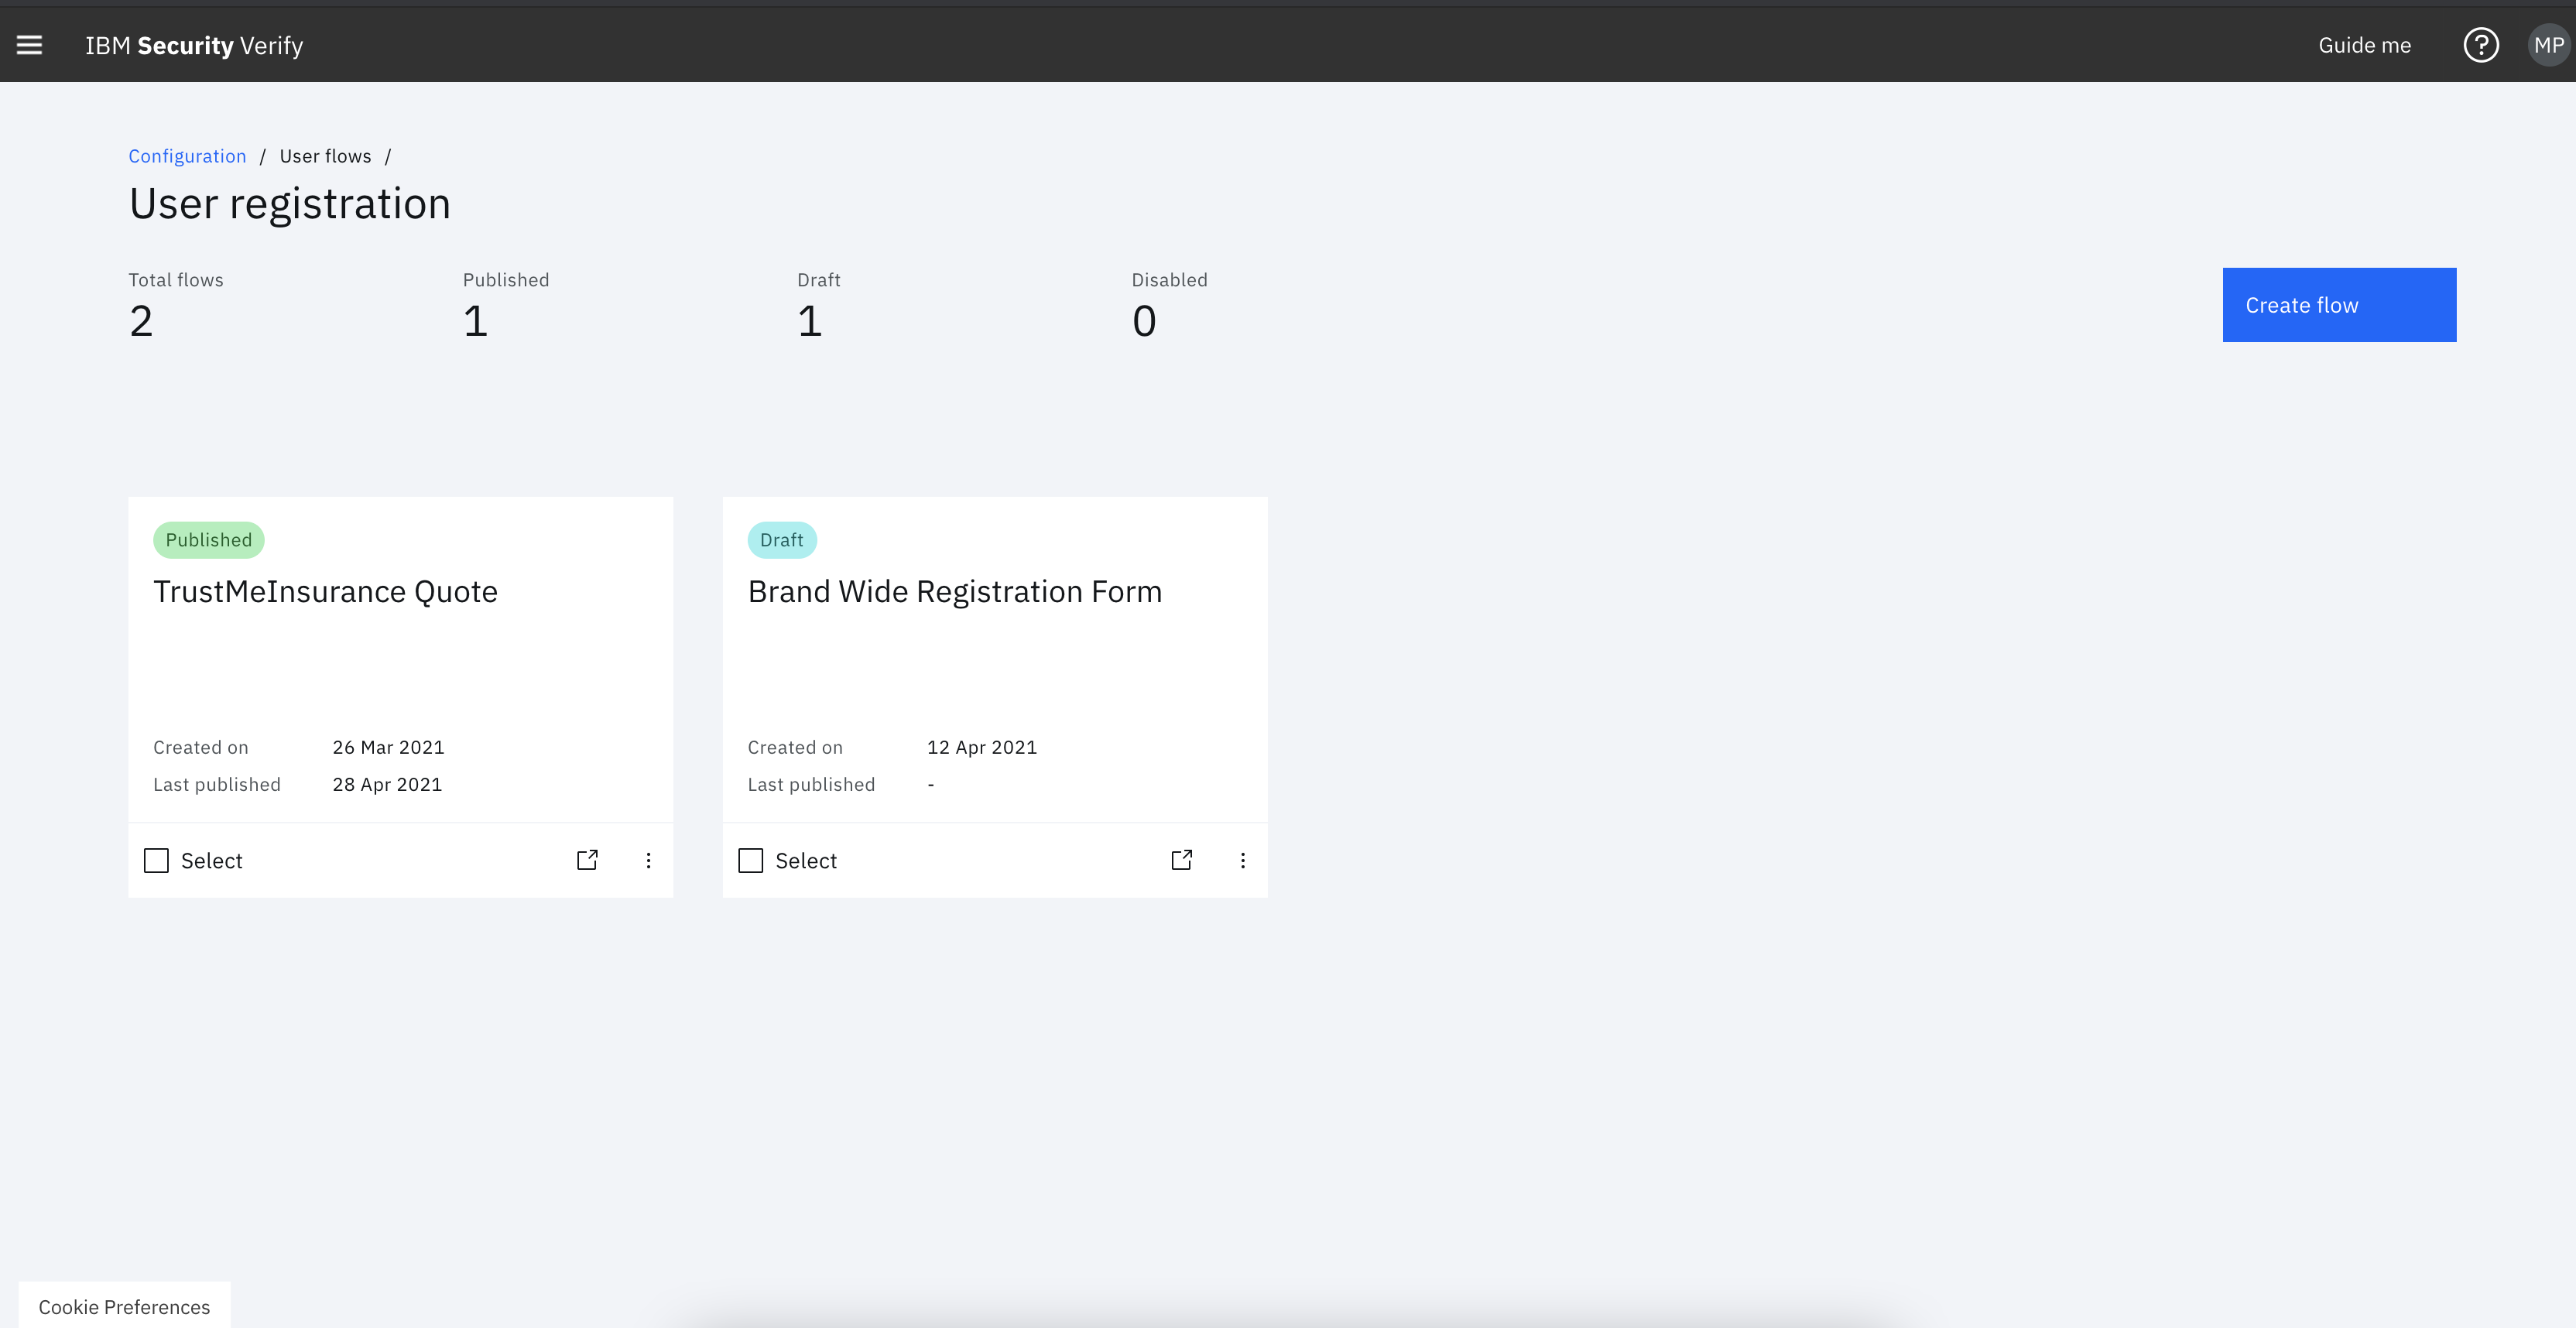 User registration page flow creation, allowing for multiple registration forms to be live and active all funneling to a single view of the consumer.